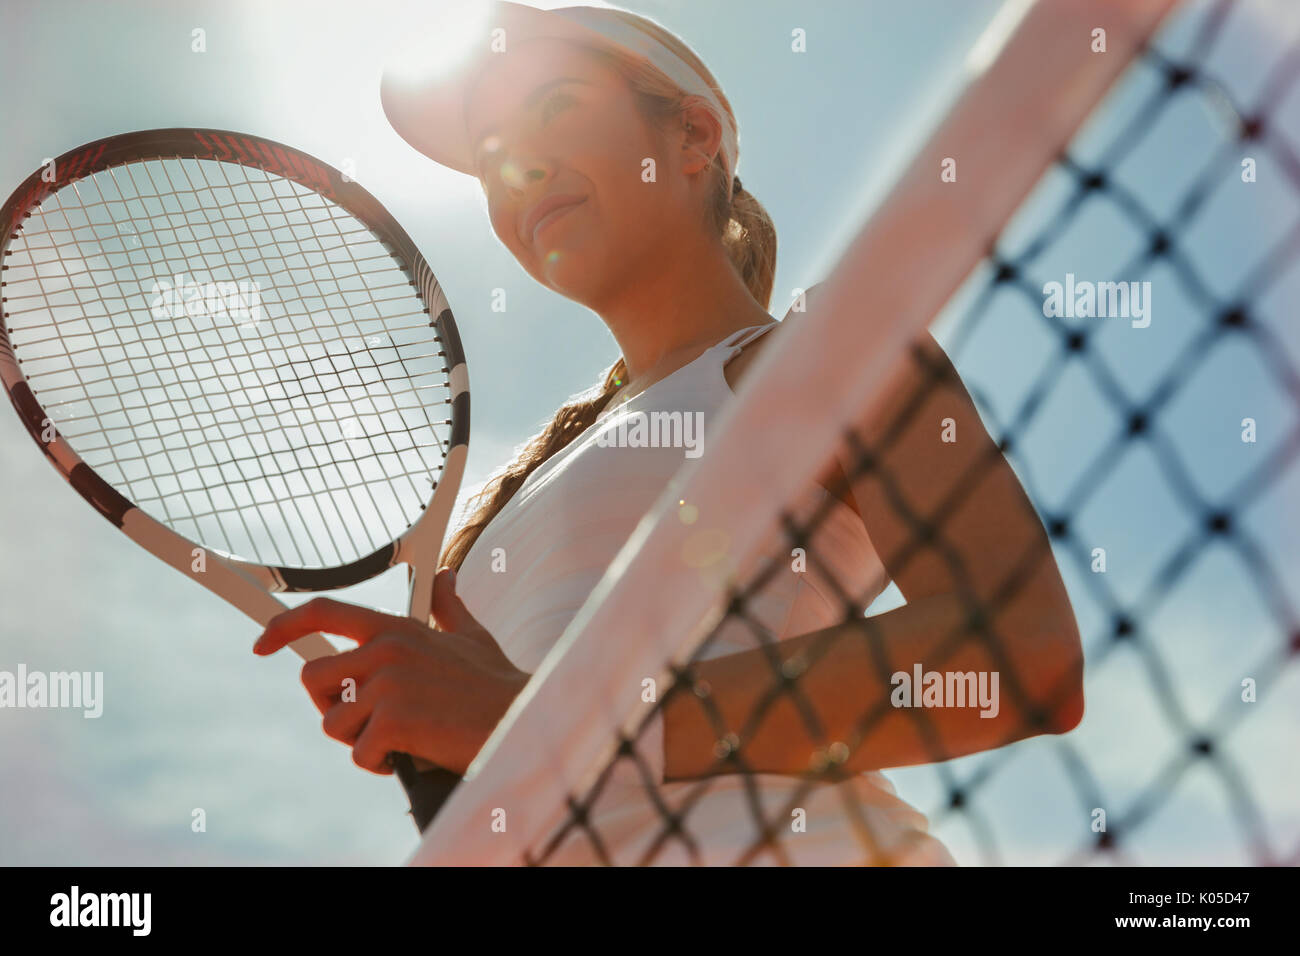 Confident young female tennis player holding tennis racket at net Stock Photo